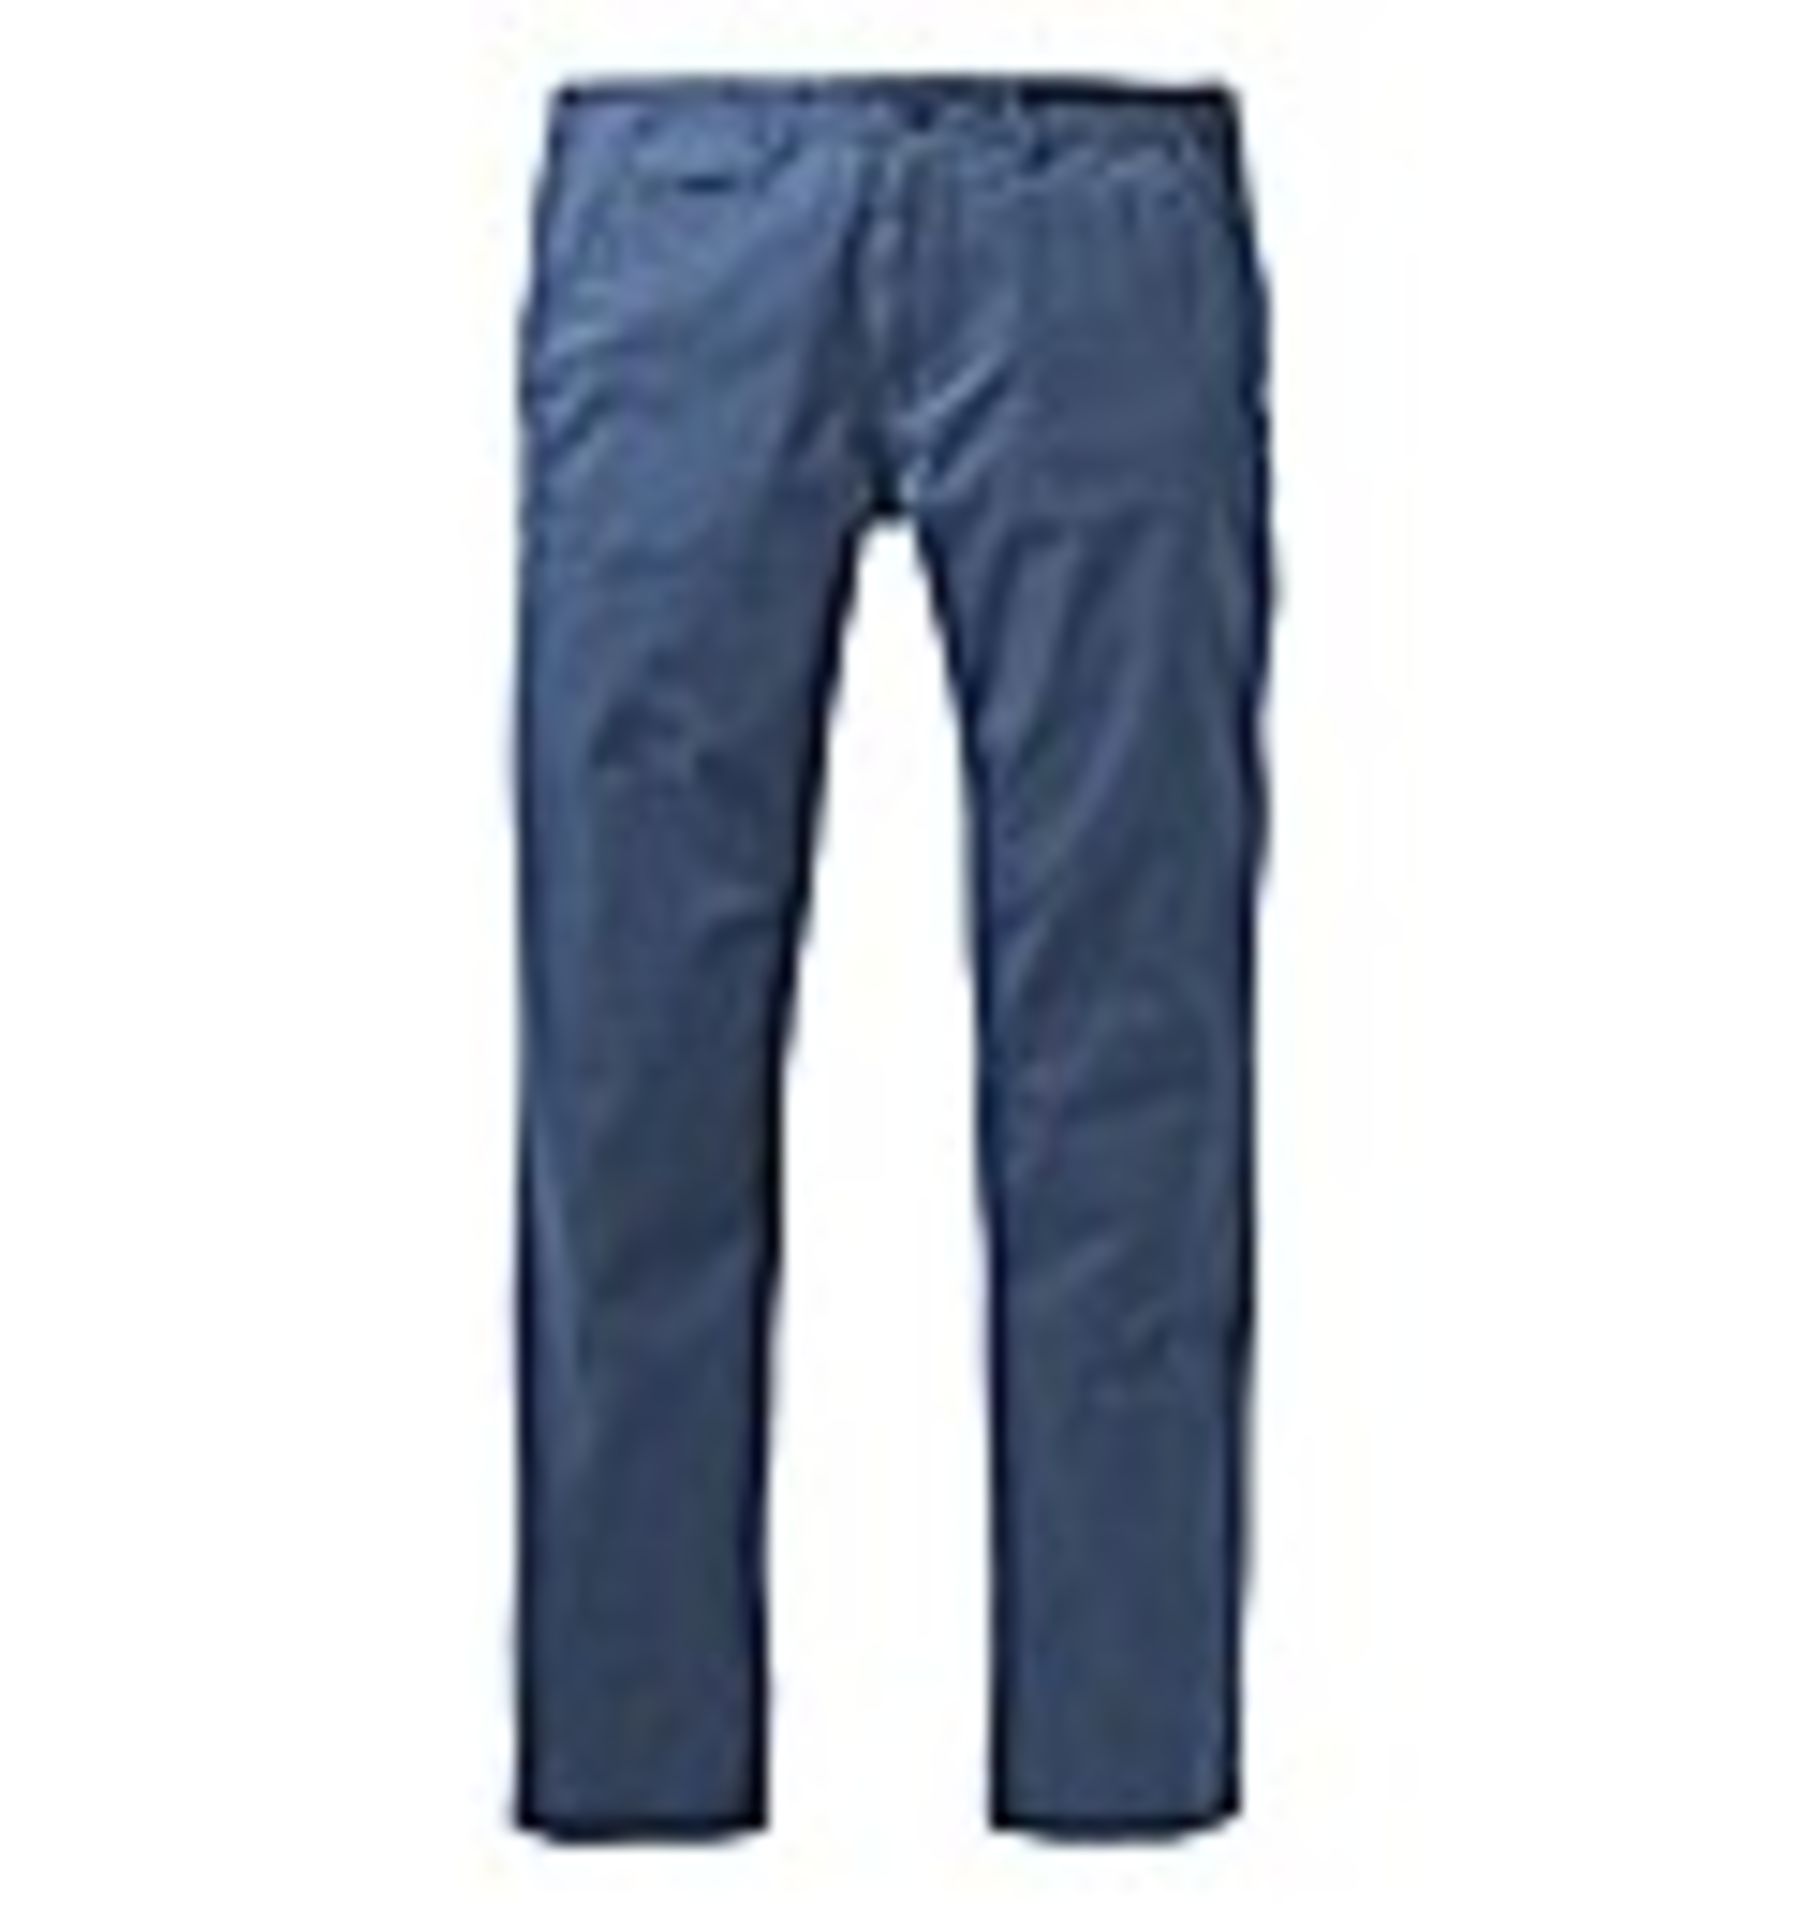 BRAND NEW Jacamo casual tapered chino 23 pants colour petrol size 52S RRP £22 Condition